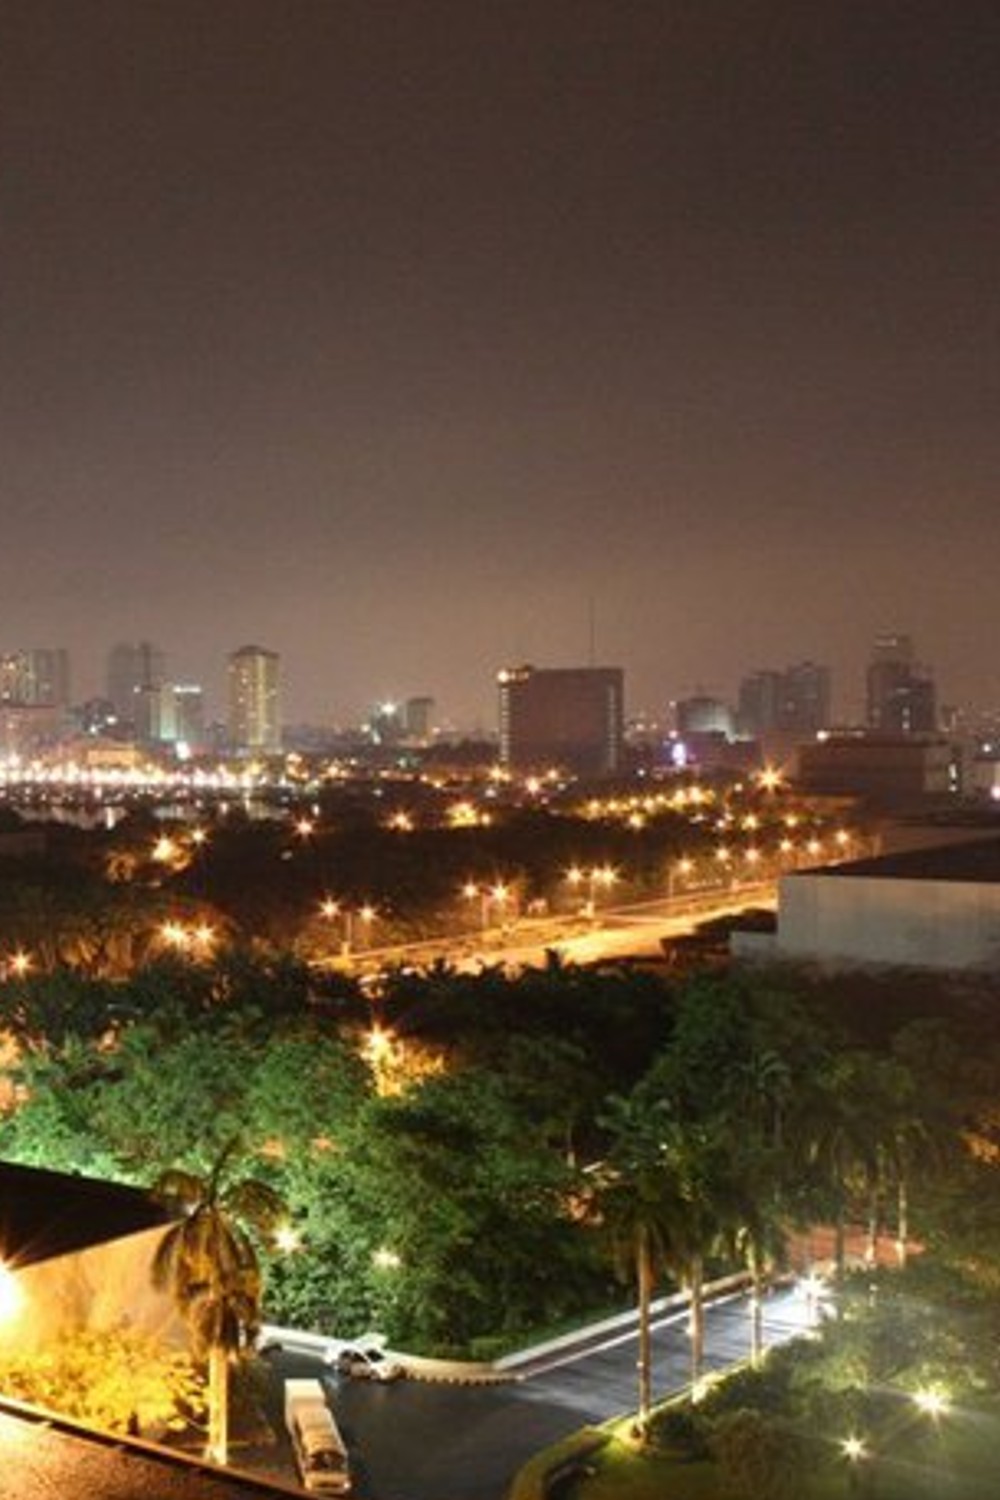 Manila in the wee hours of the morning